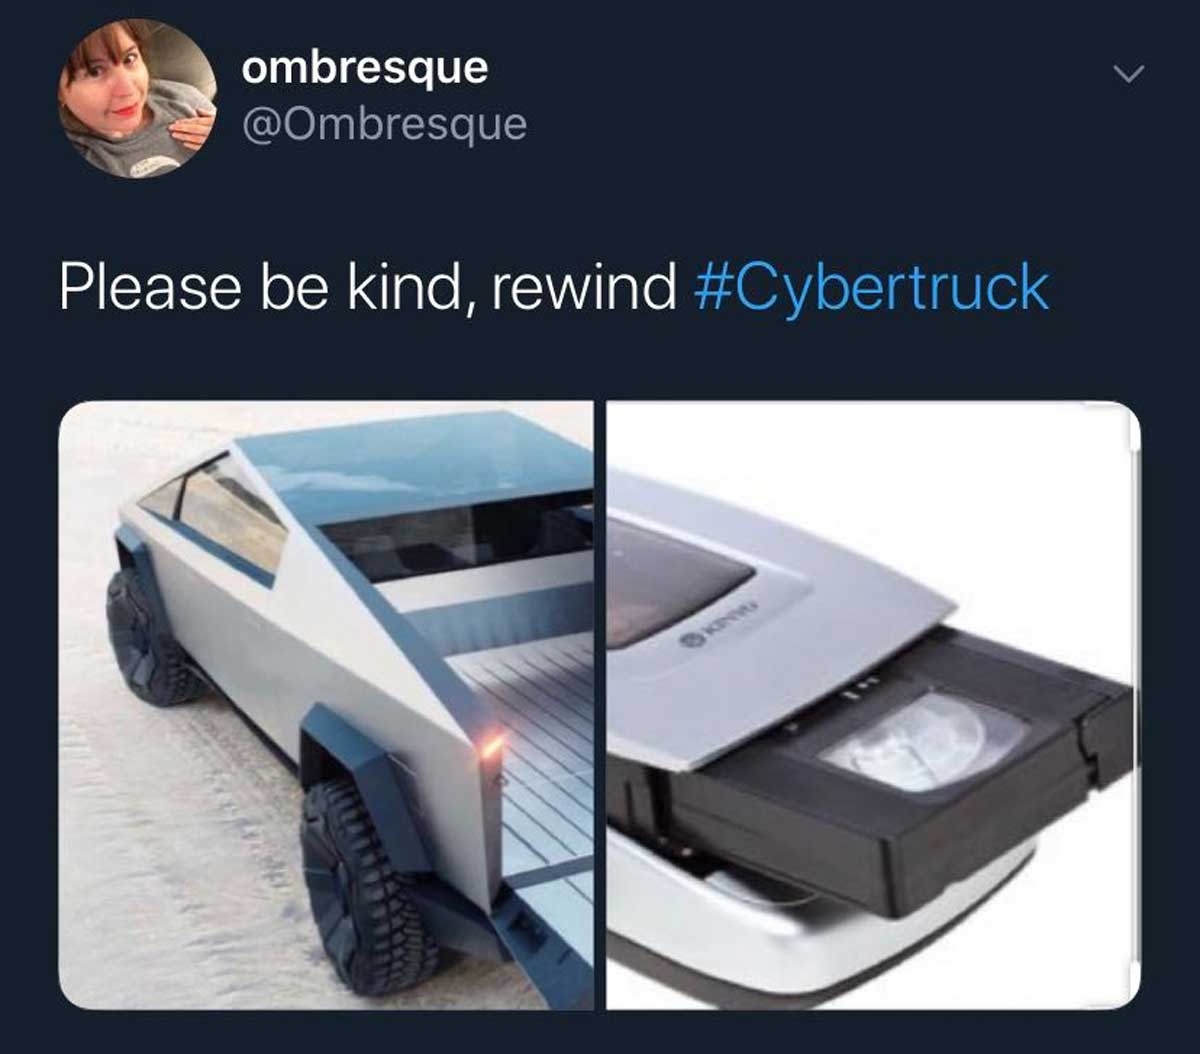 Tweet about Tesla Cybertruck with the caption 'please be kind, rewind #cybertruck' and picture of the back of the Tesla Cybertruck and a VCR Rewinder